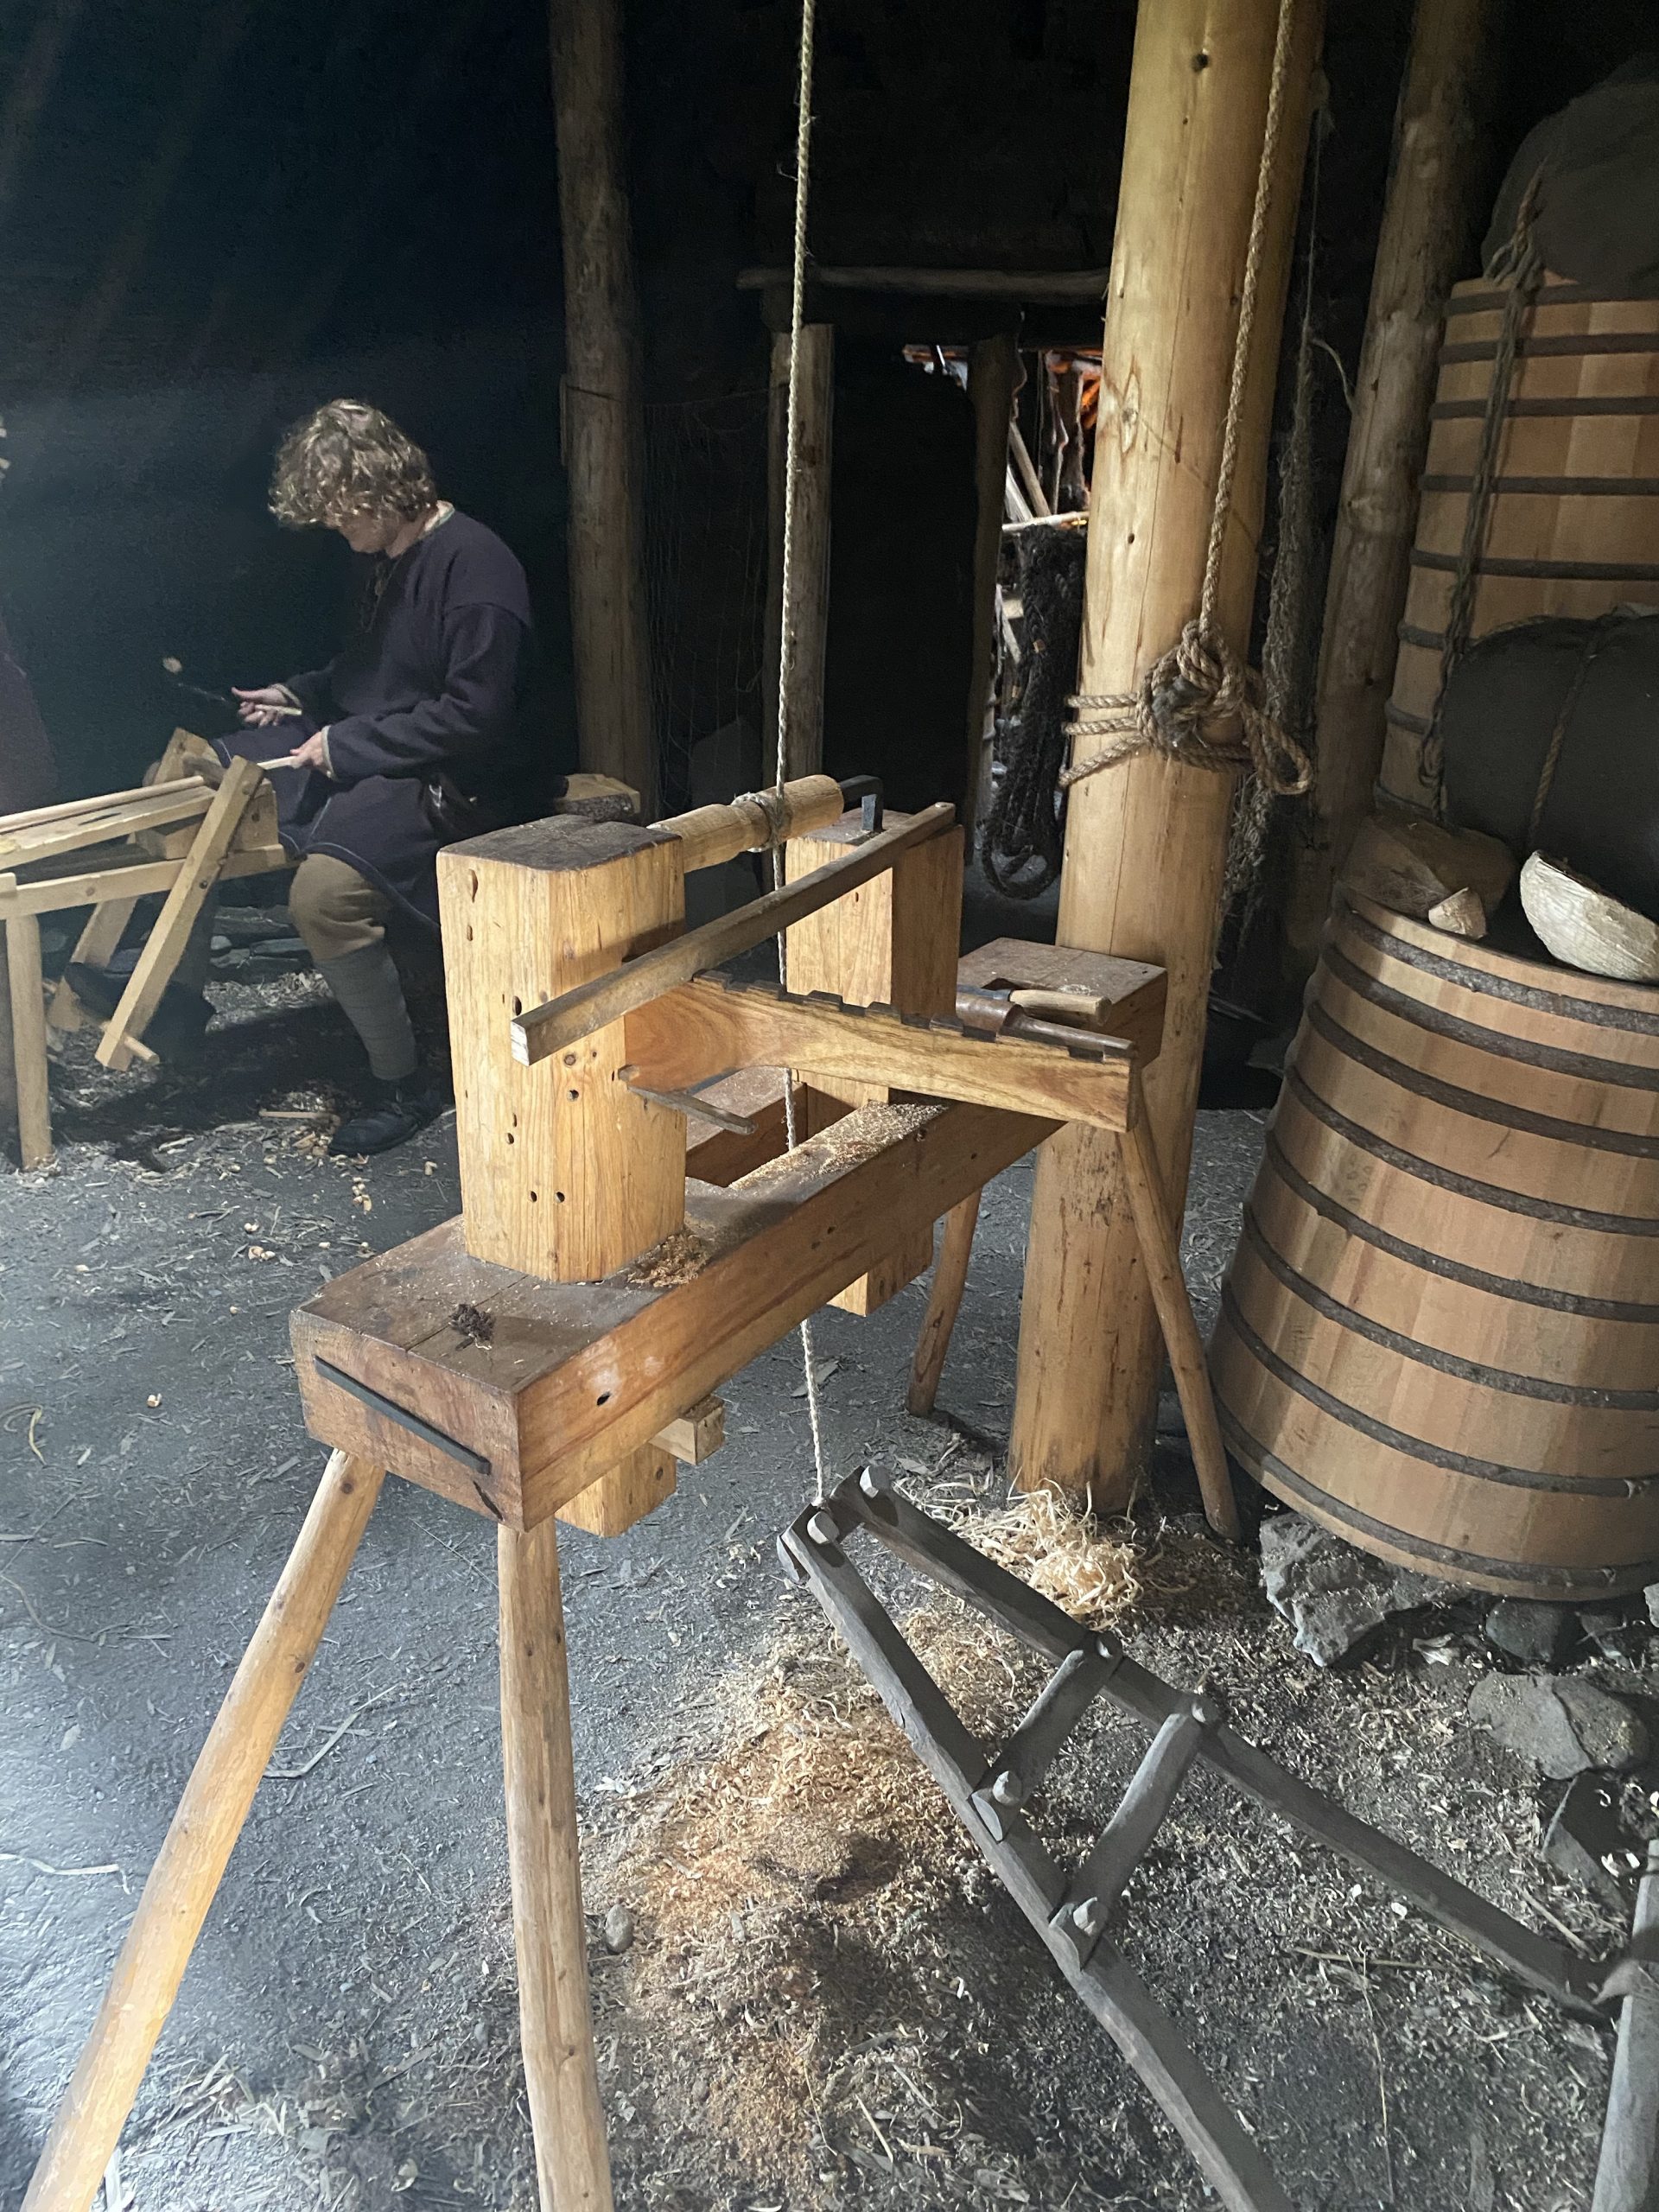 A foot/spring driven reciprocating wood lathe in a re-creation of a 1,000 year old Norse sod house.